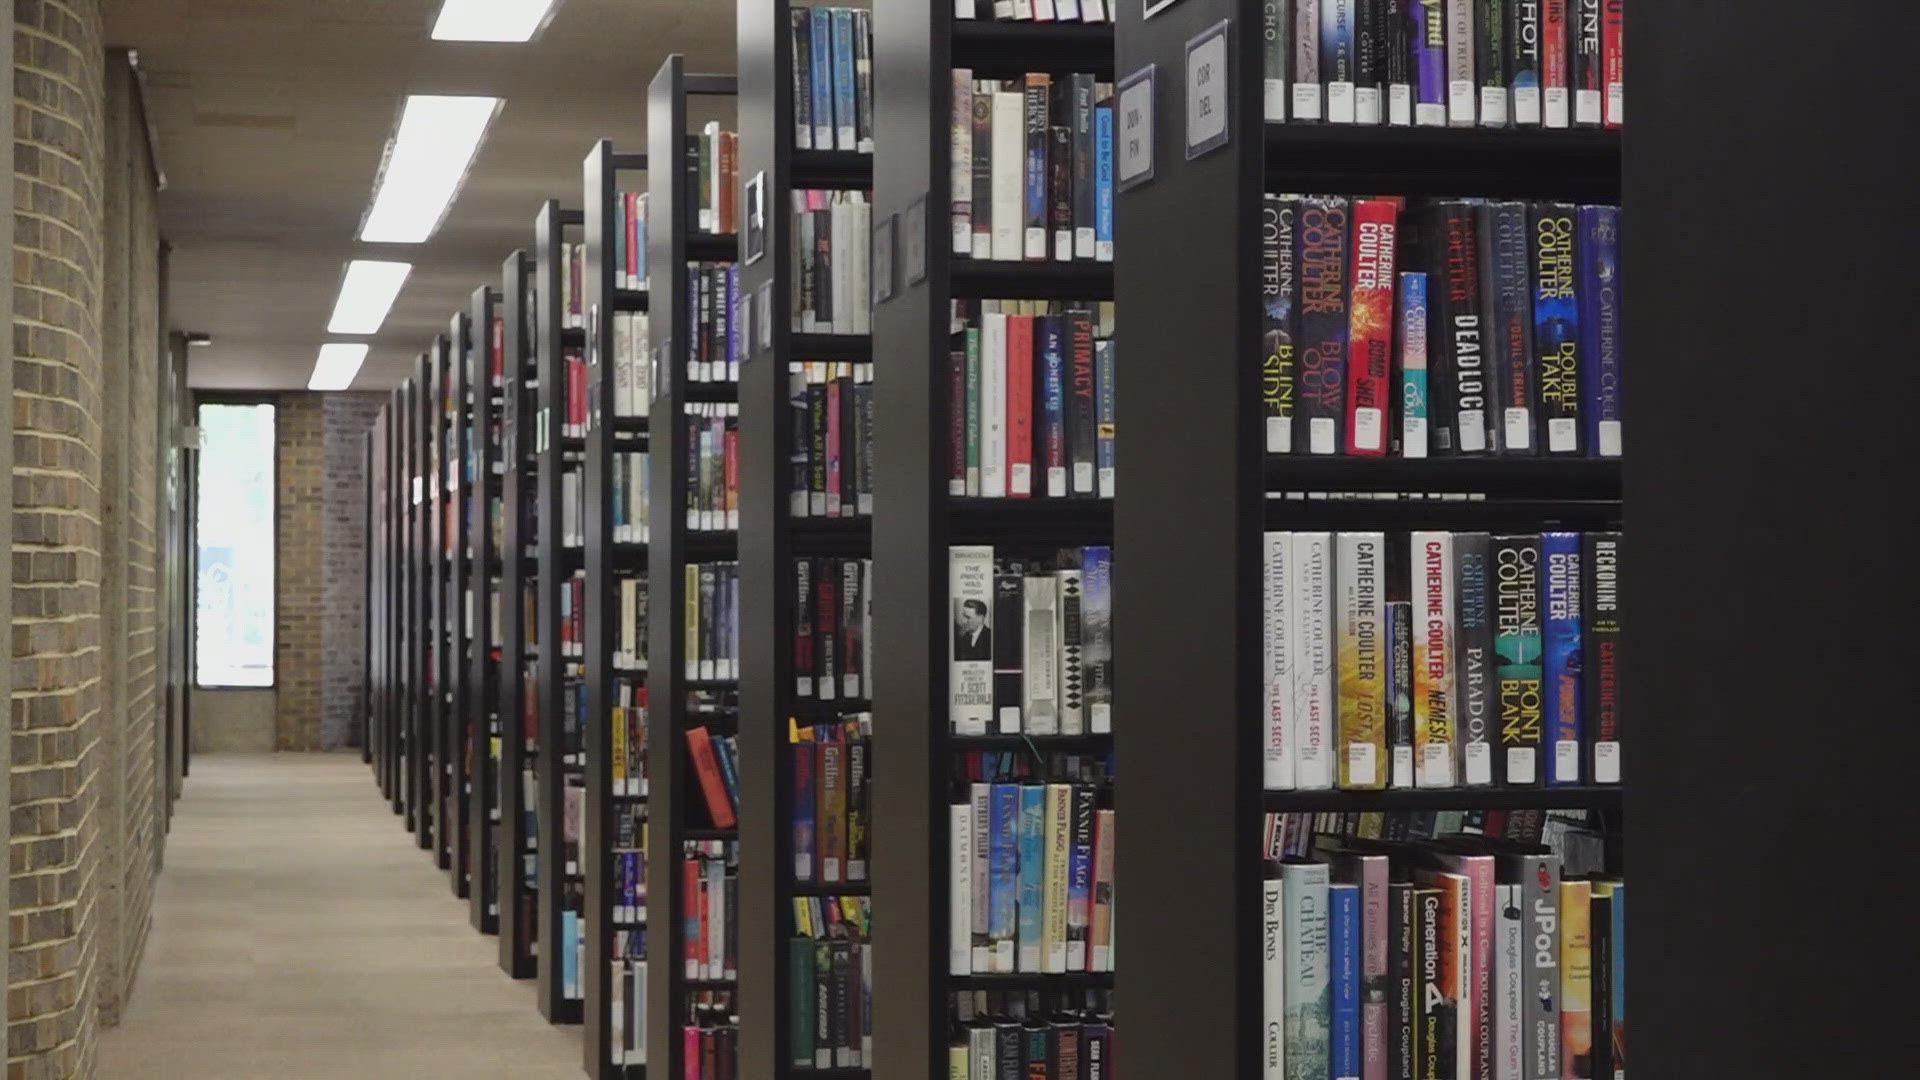 Knox County schools are now tasked with how to filter through their libraries and comply with the new law.